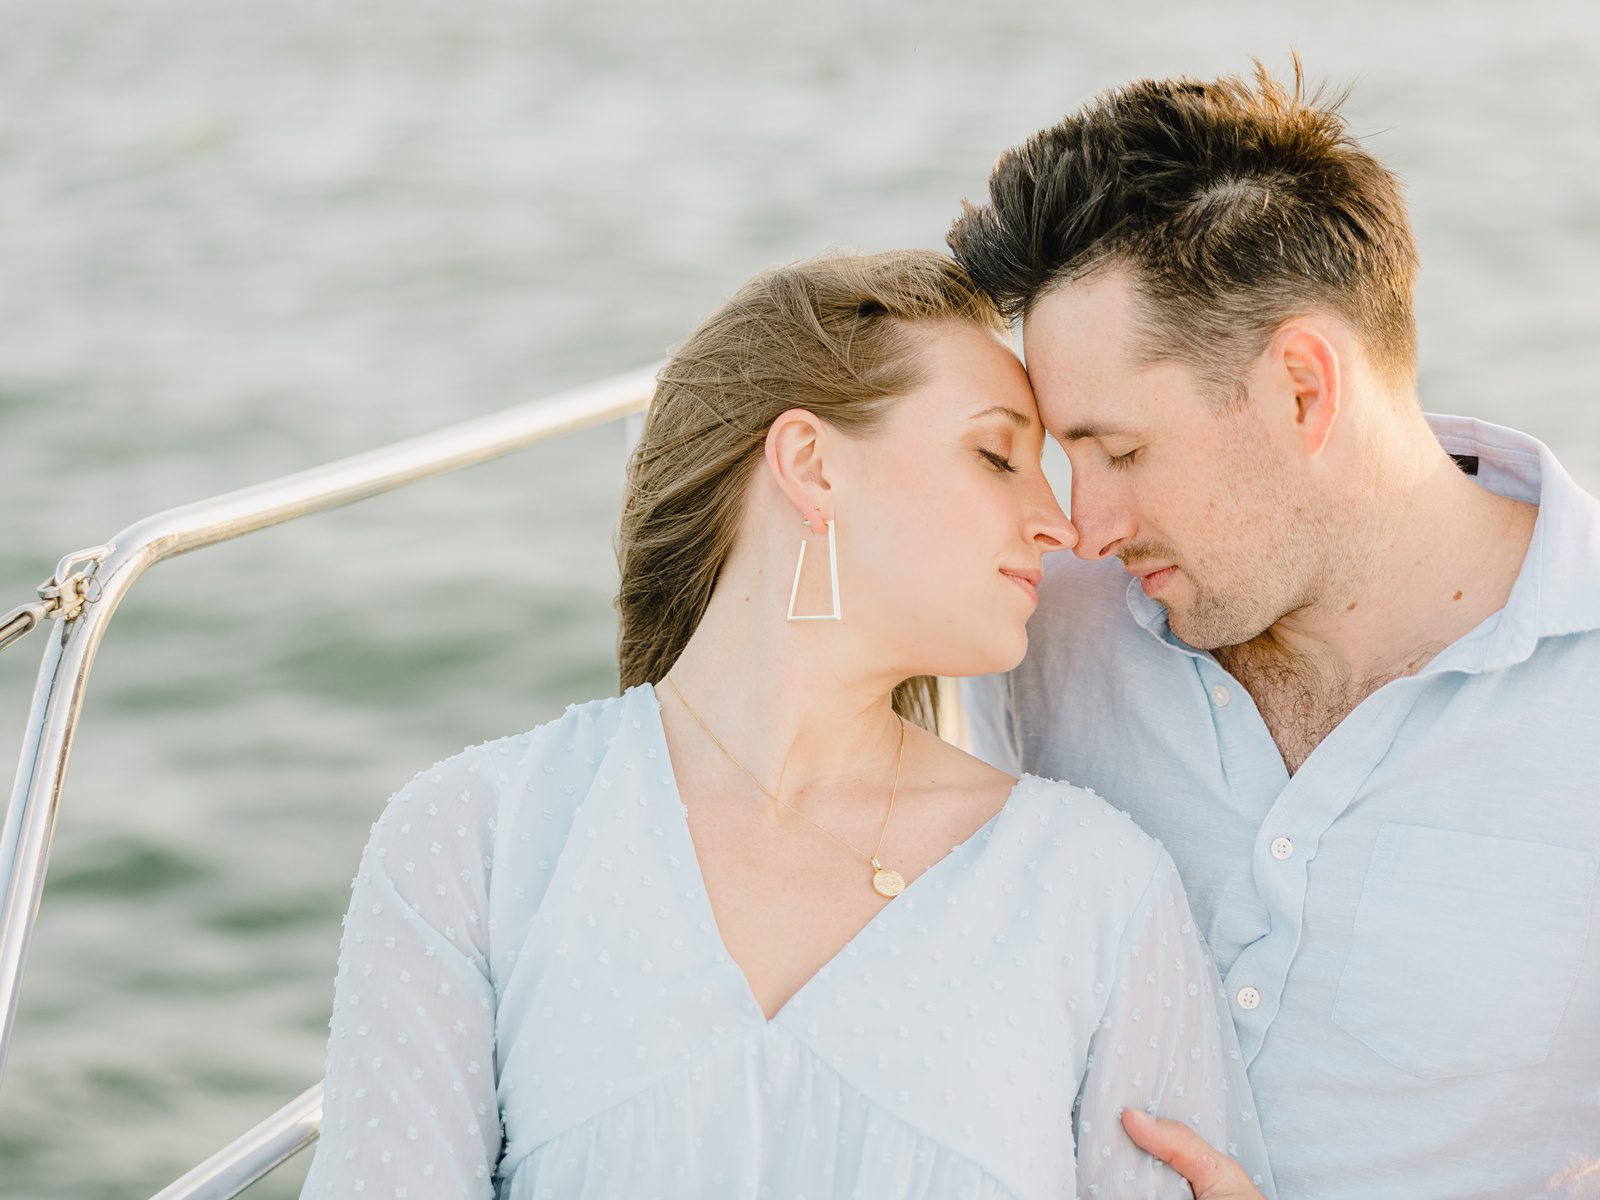 couple in a romantic pose on a sailboat